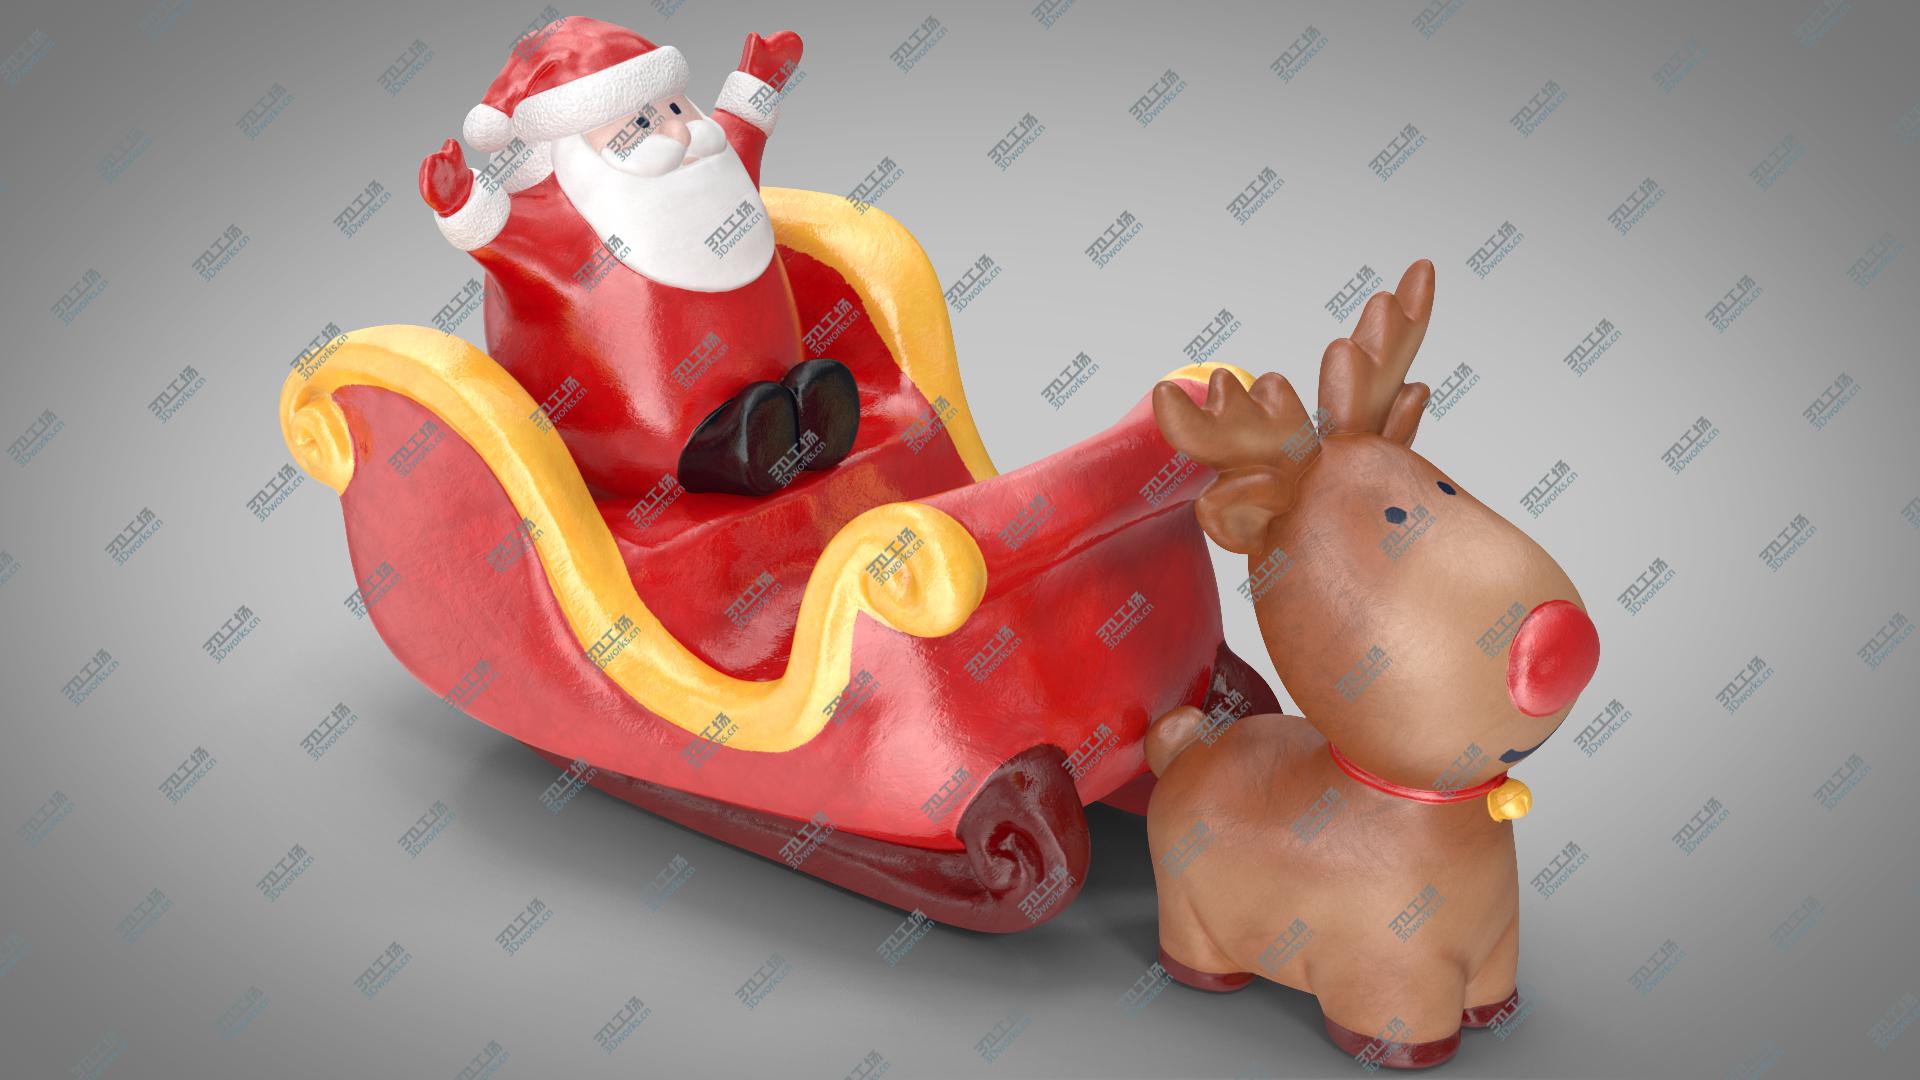 images/goods_img/202105071/Santa Claus with Sleigh Decorative Figurine 2 3D model/1.jpg